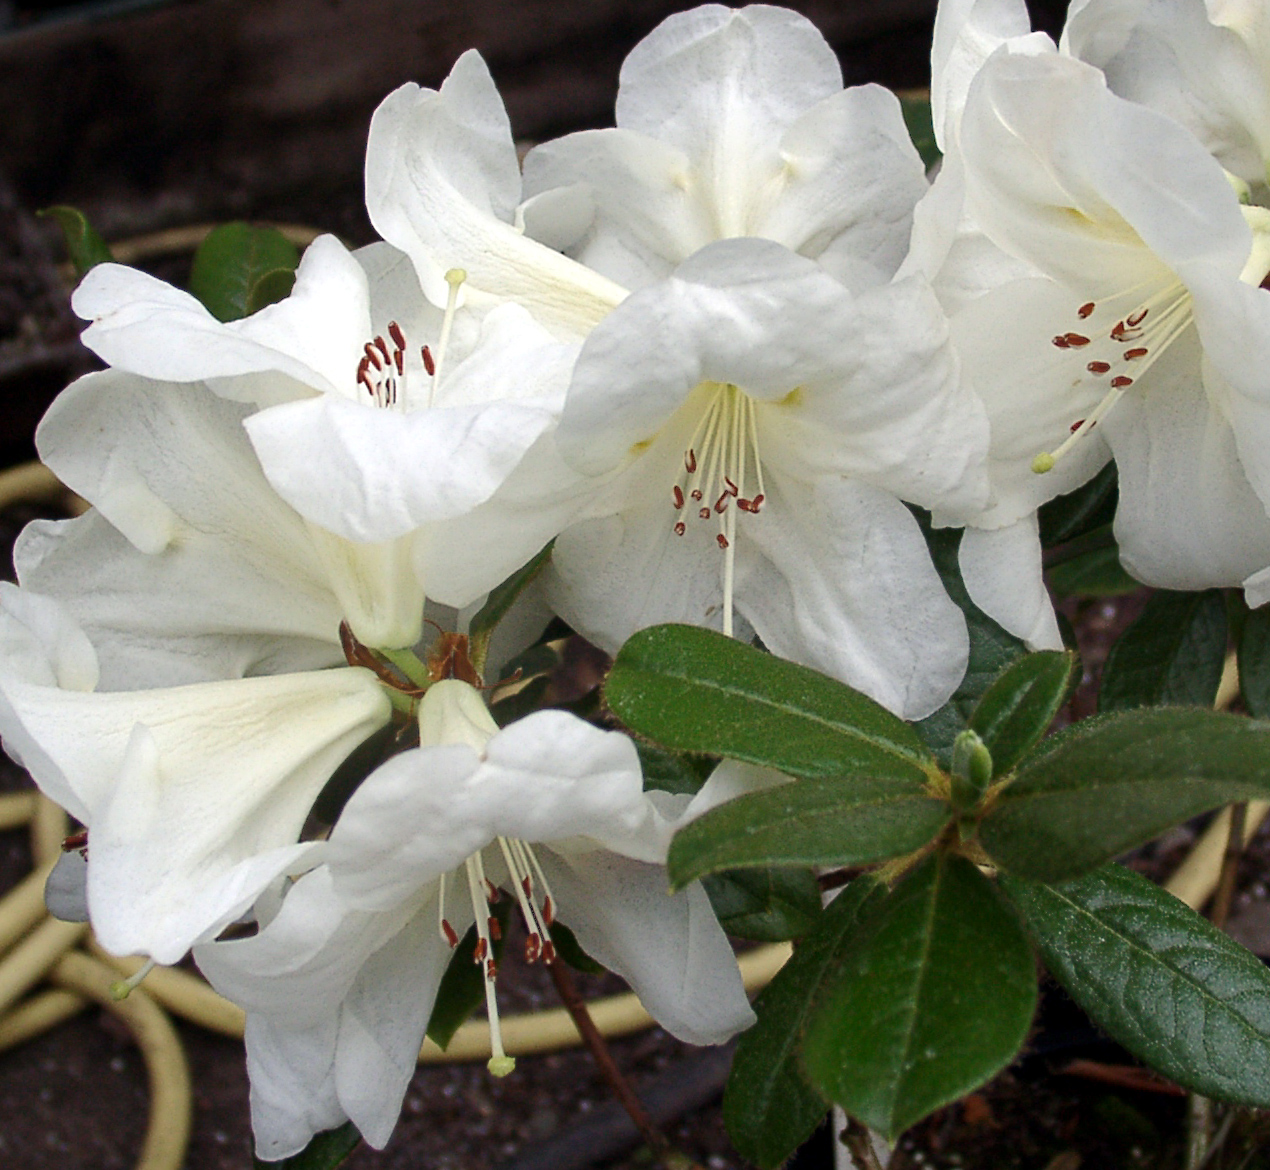 MARTHA WRIGHT Rhododendron Maddenia and Related Rhododendrons